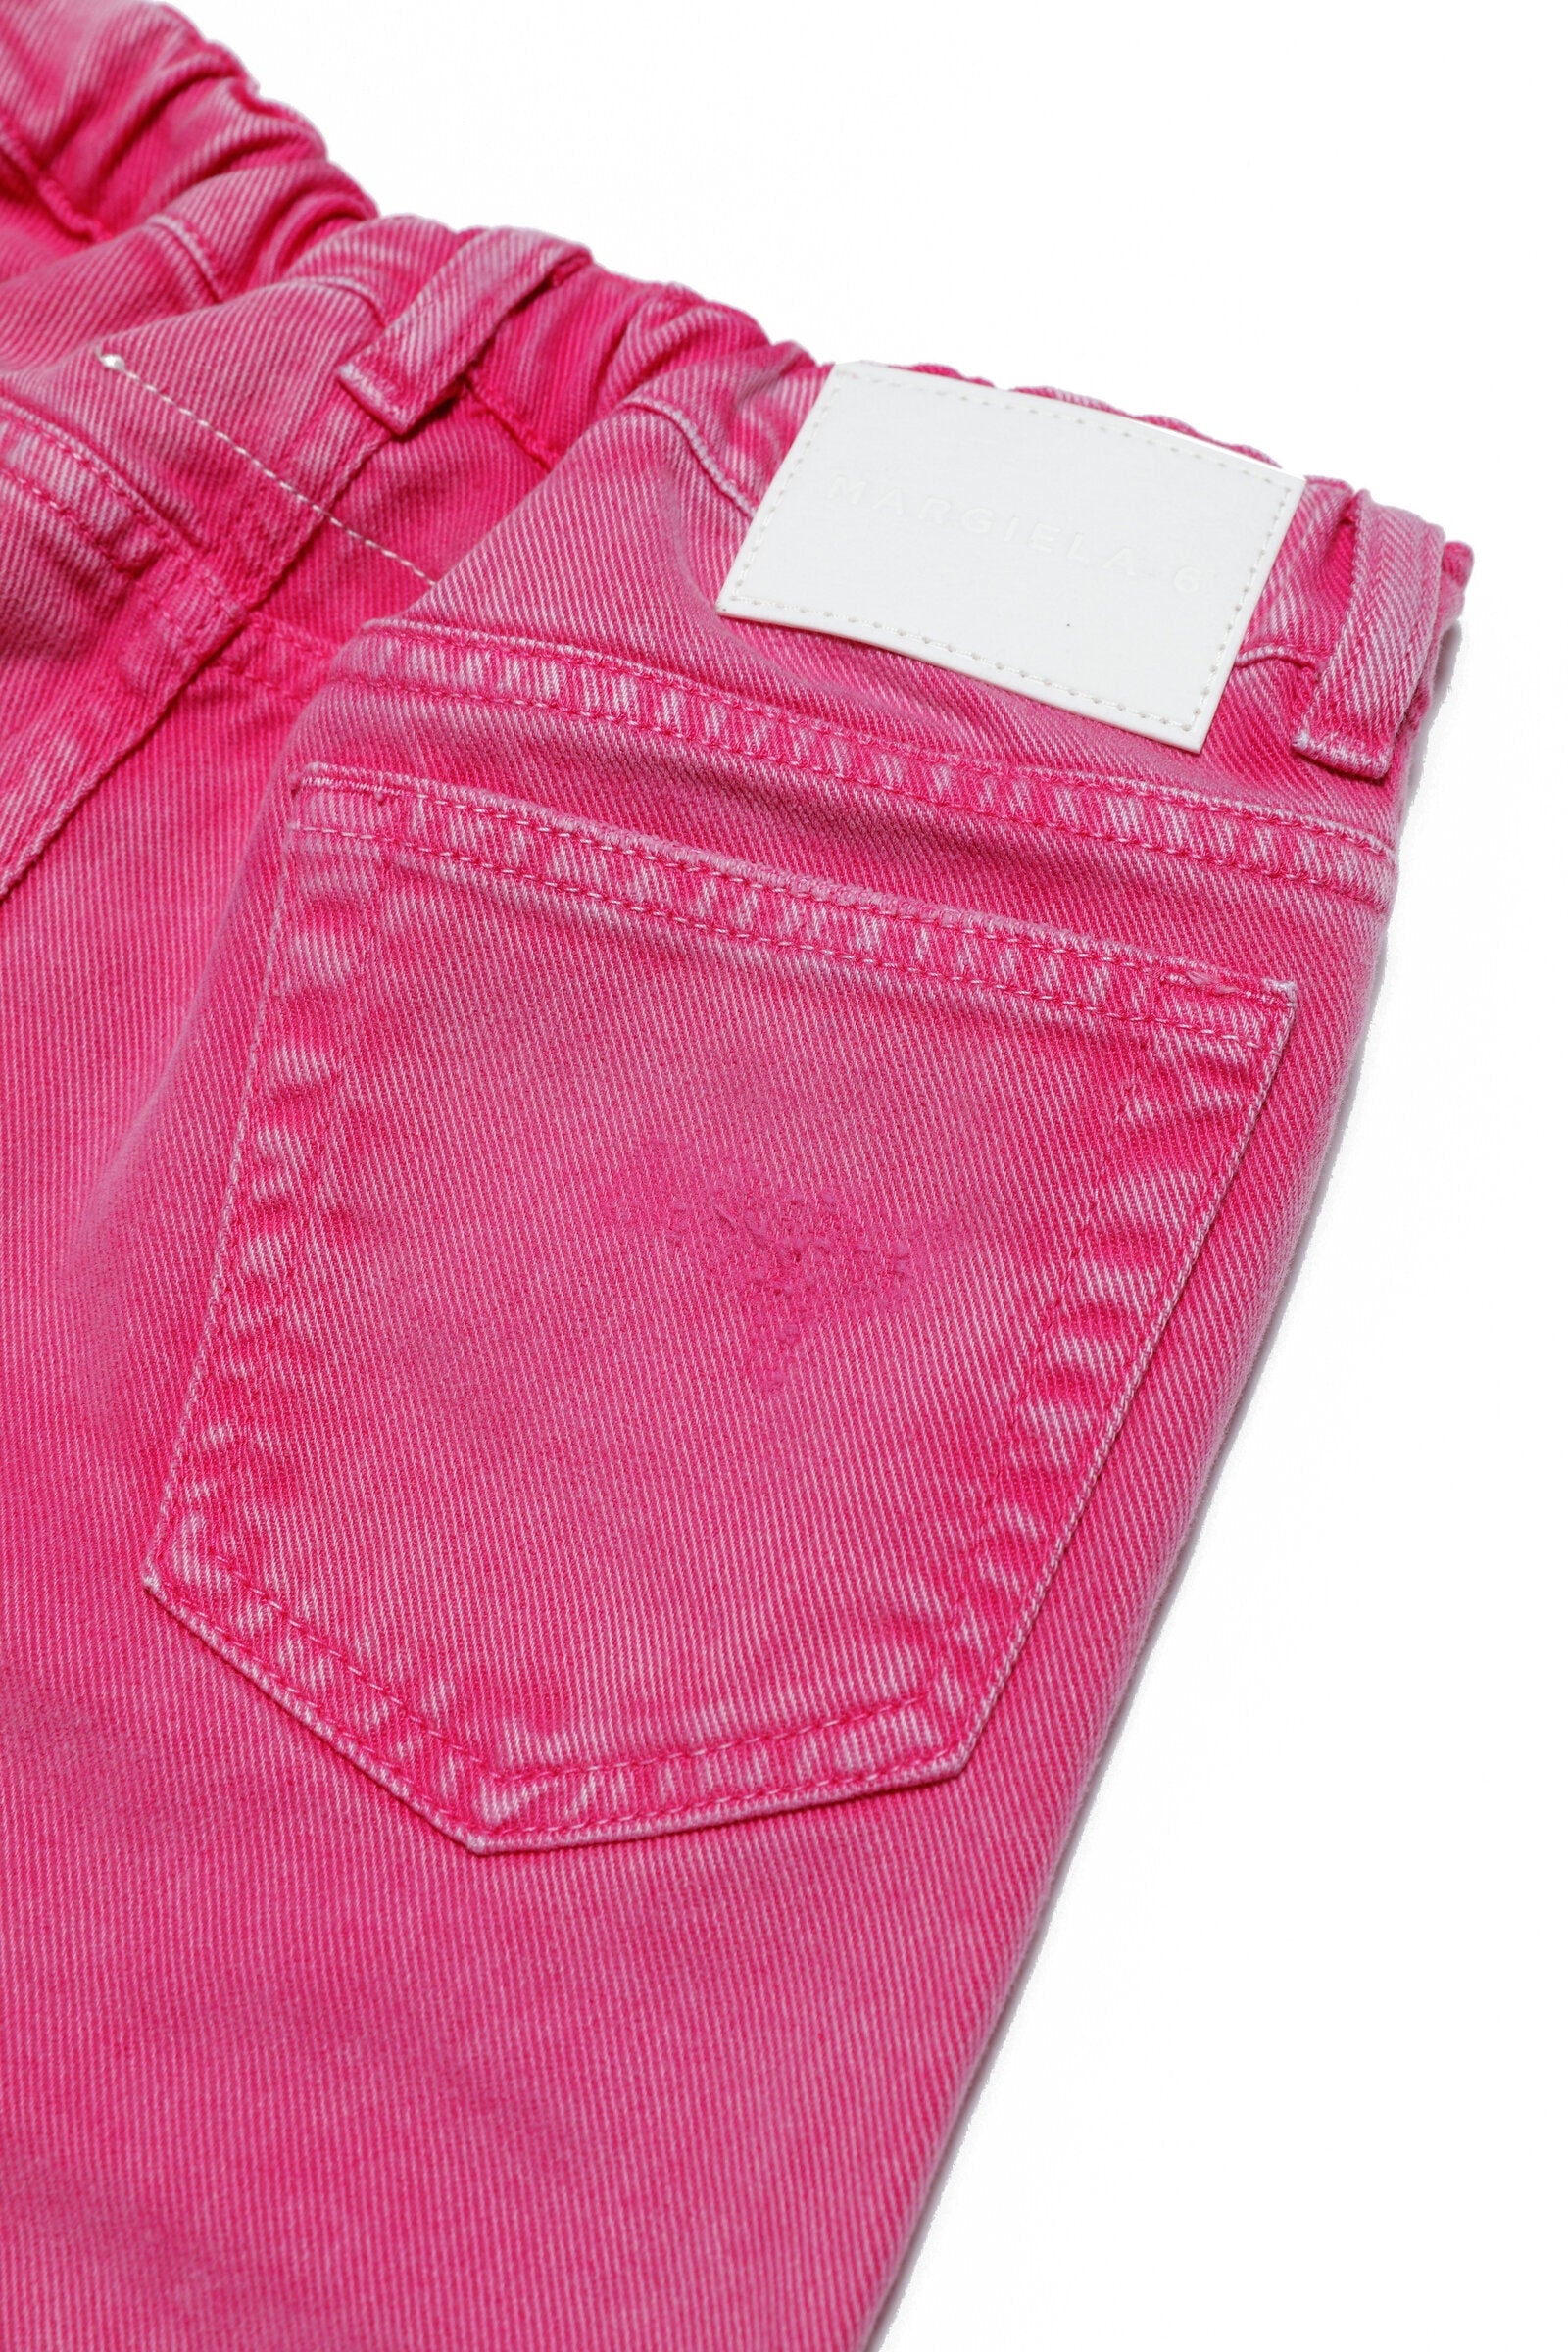 Pink wide fit jeans with breaks